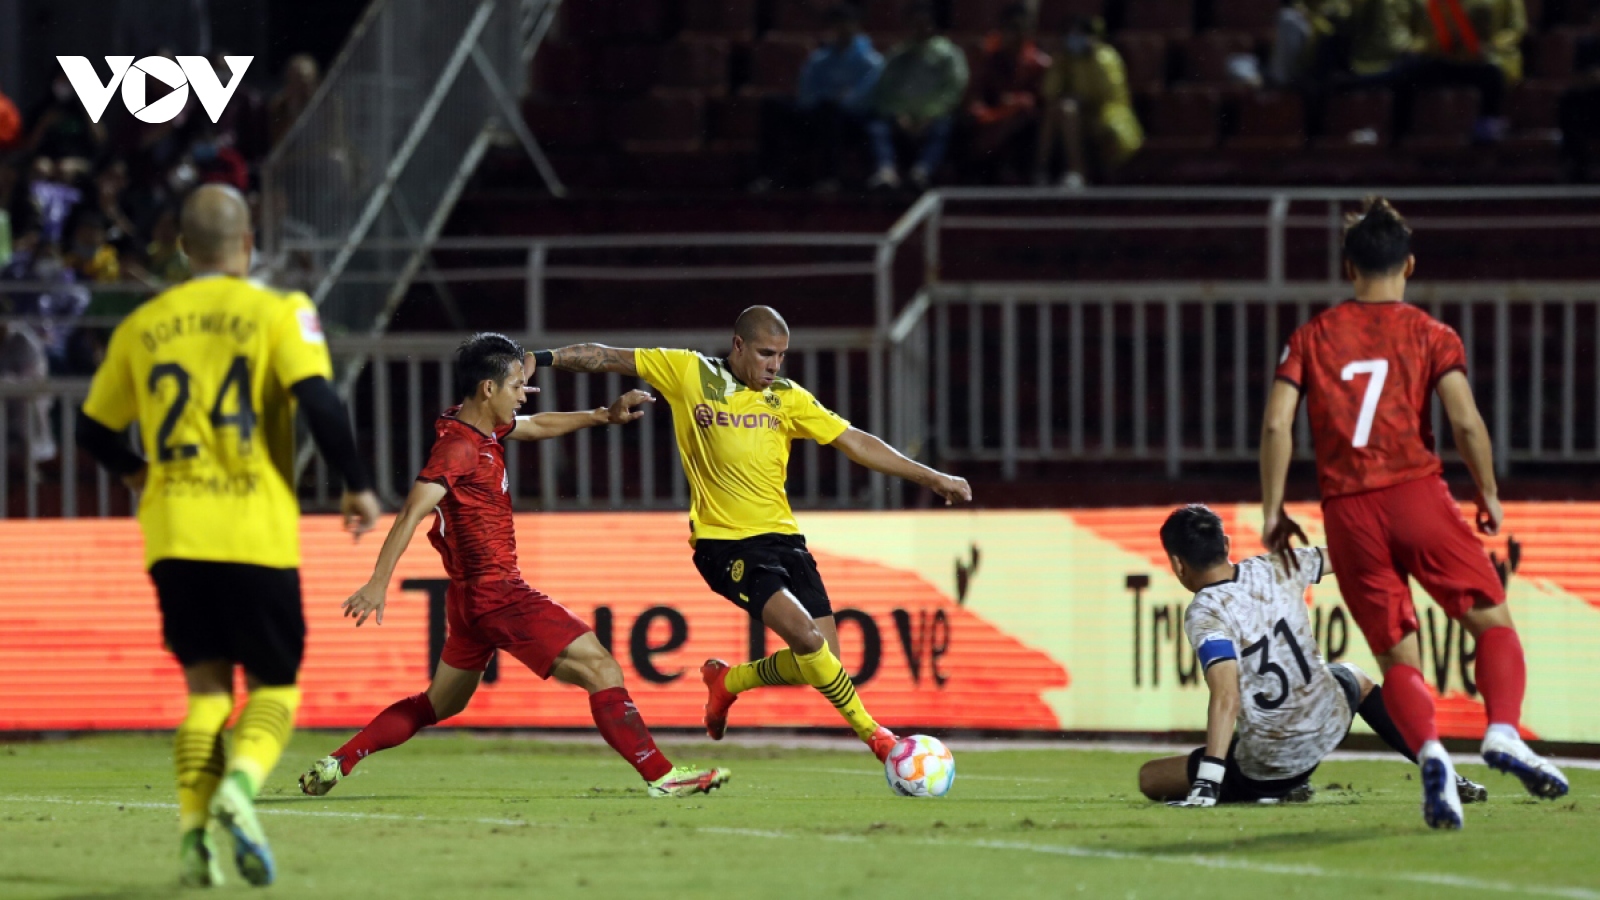 Electric atmosphere as Dortmund Legends trounce Vietnam All Stars in friendly